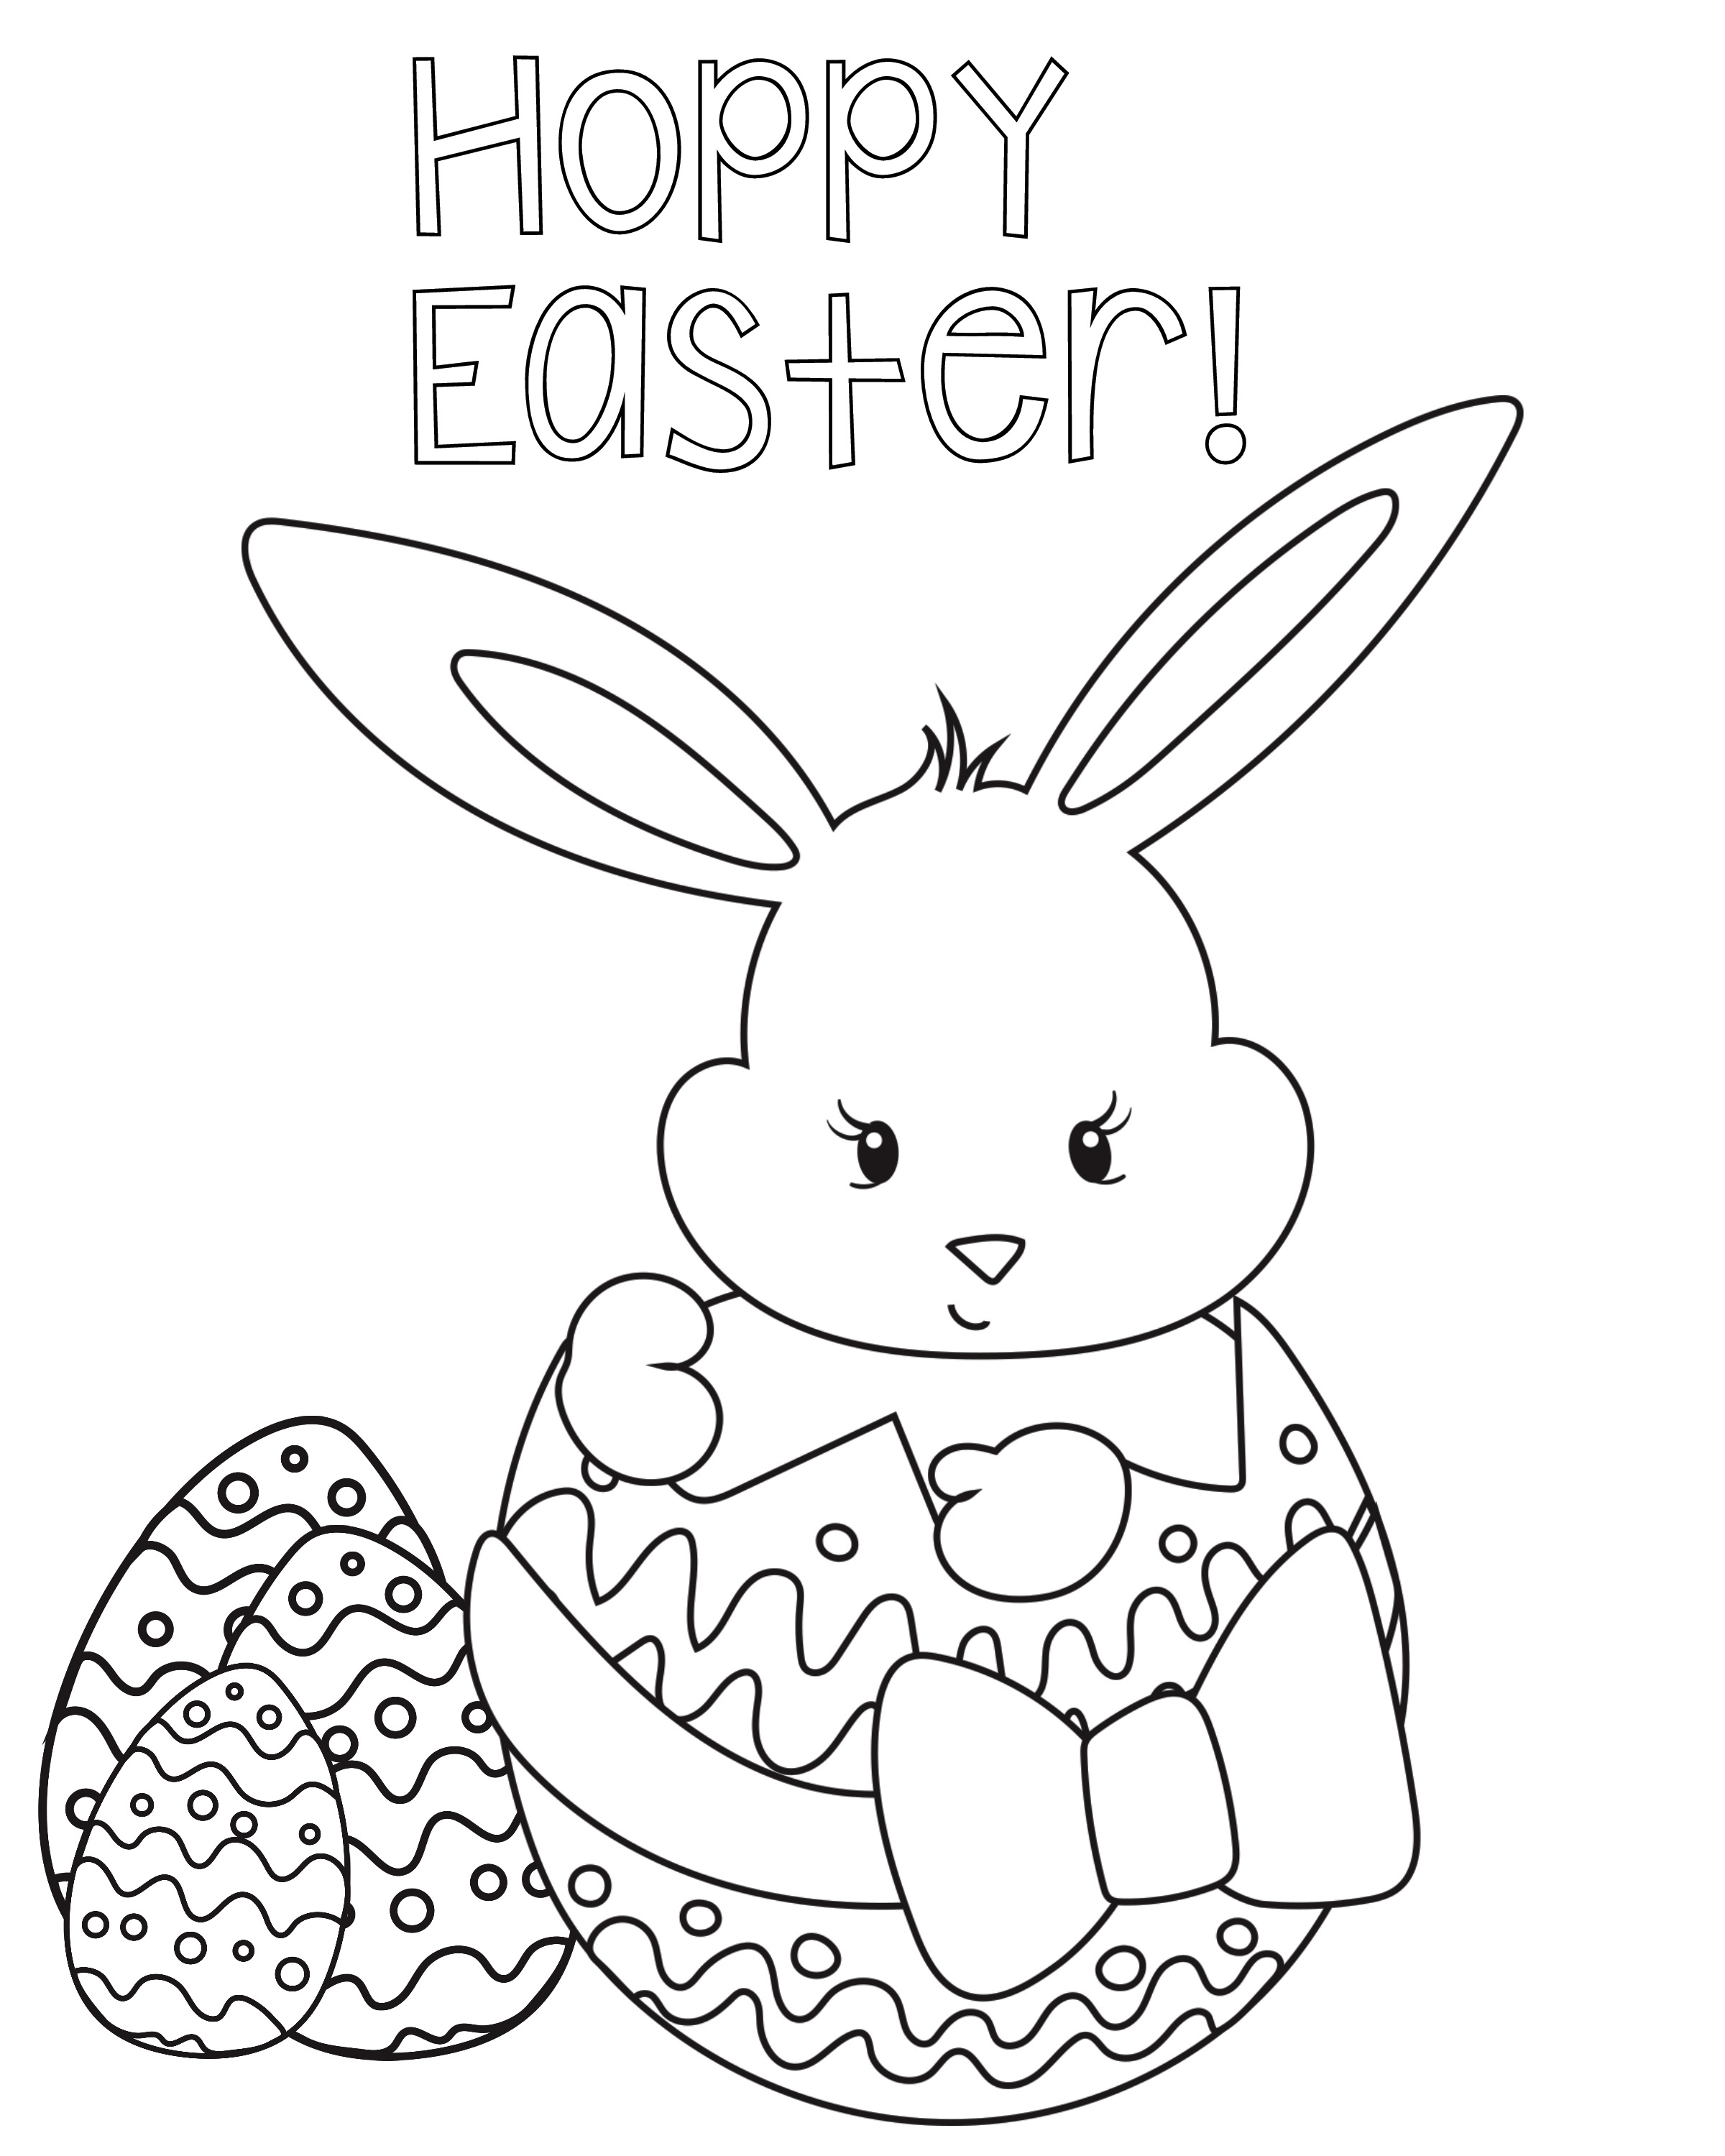 Happy Easter Coloring Pages - Best Coloring Pages For Kids